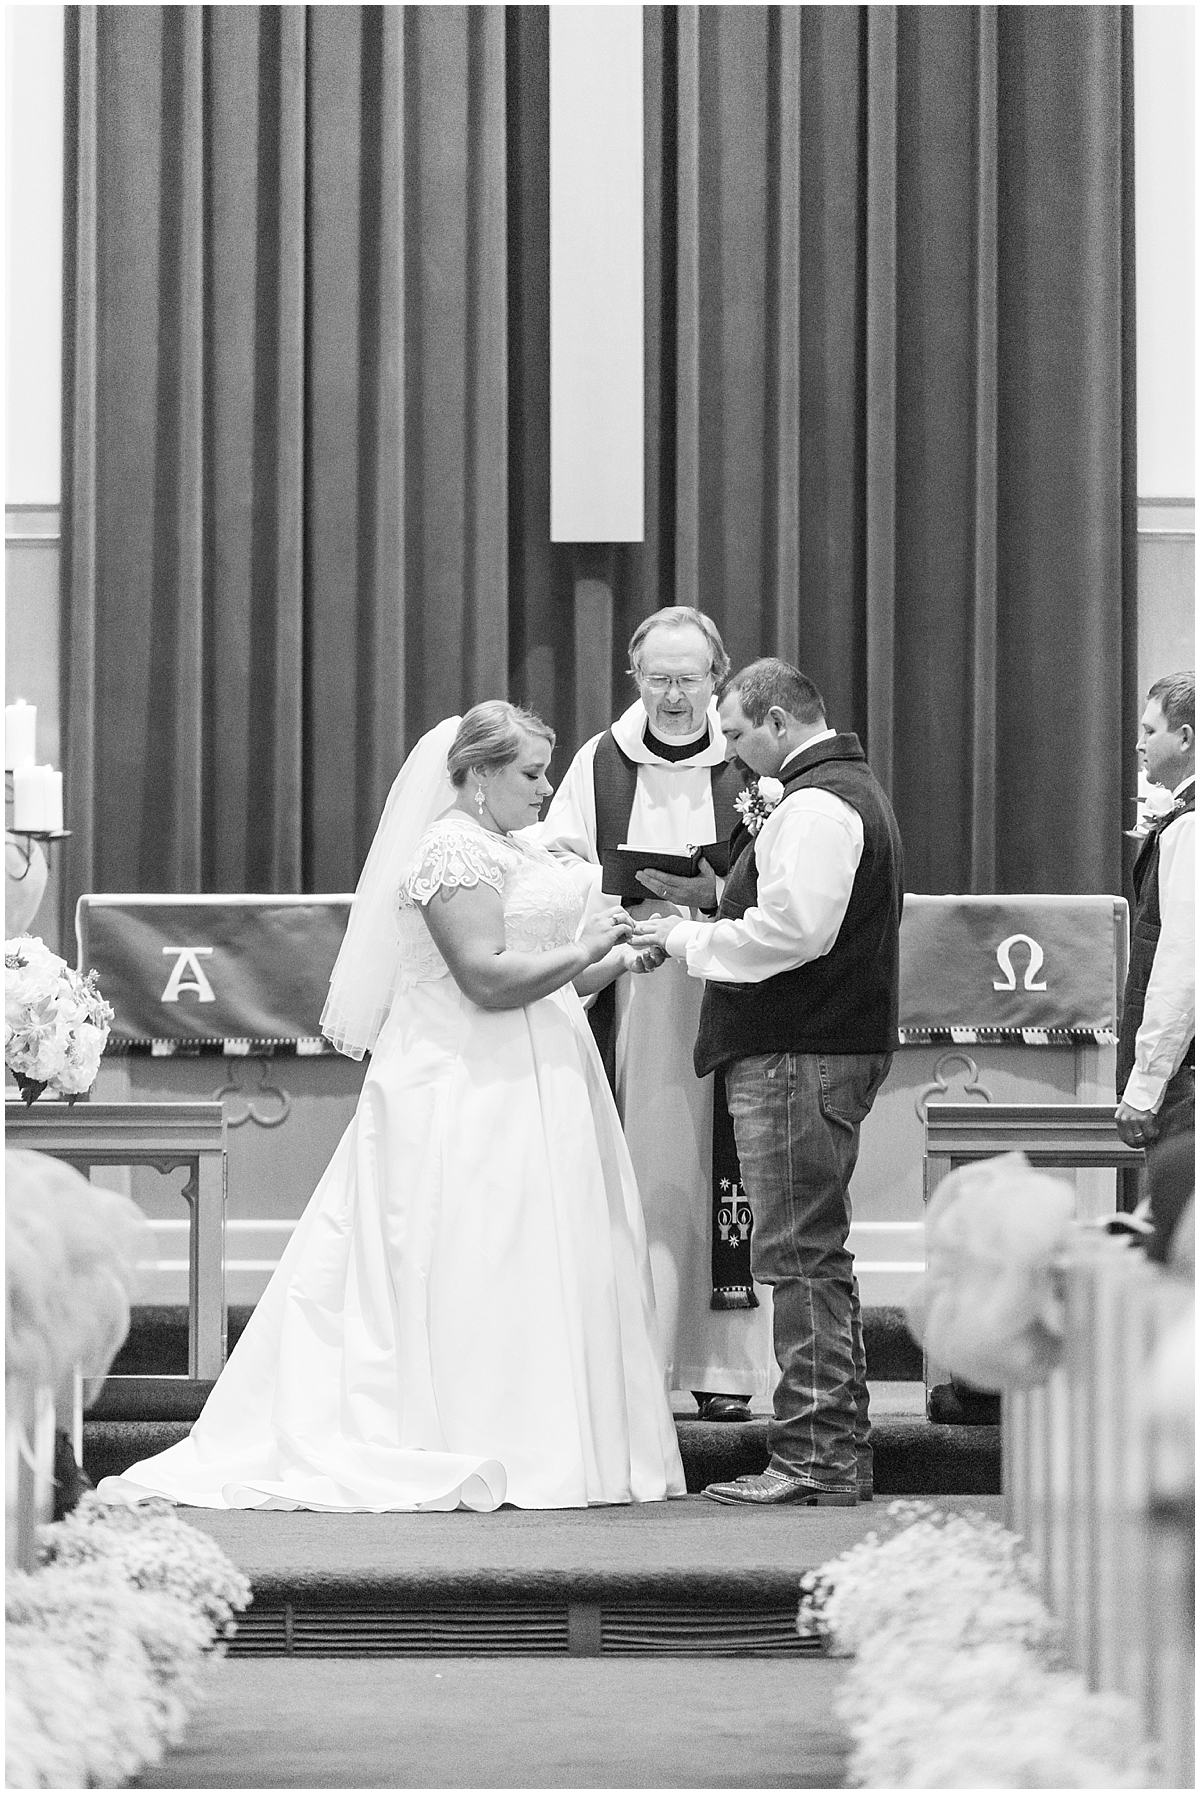 a-charcoal-grey-ivory-burgundy-winter-wedding-at-bethany-lutheran-church-in-fredericksburg-texas-by-allison-jeffers-wedding-photography-fredericksburg-wedding-photographer_0035